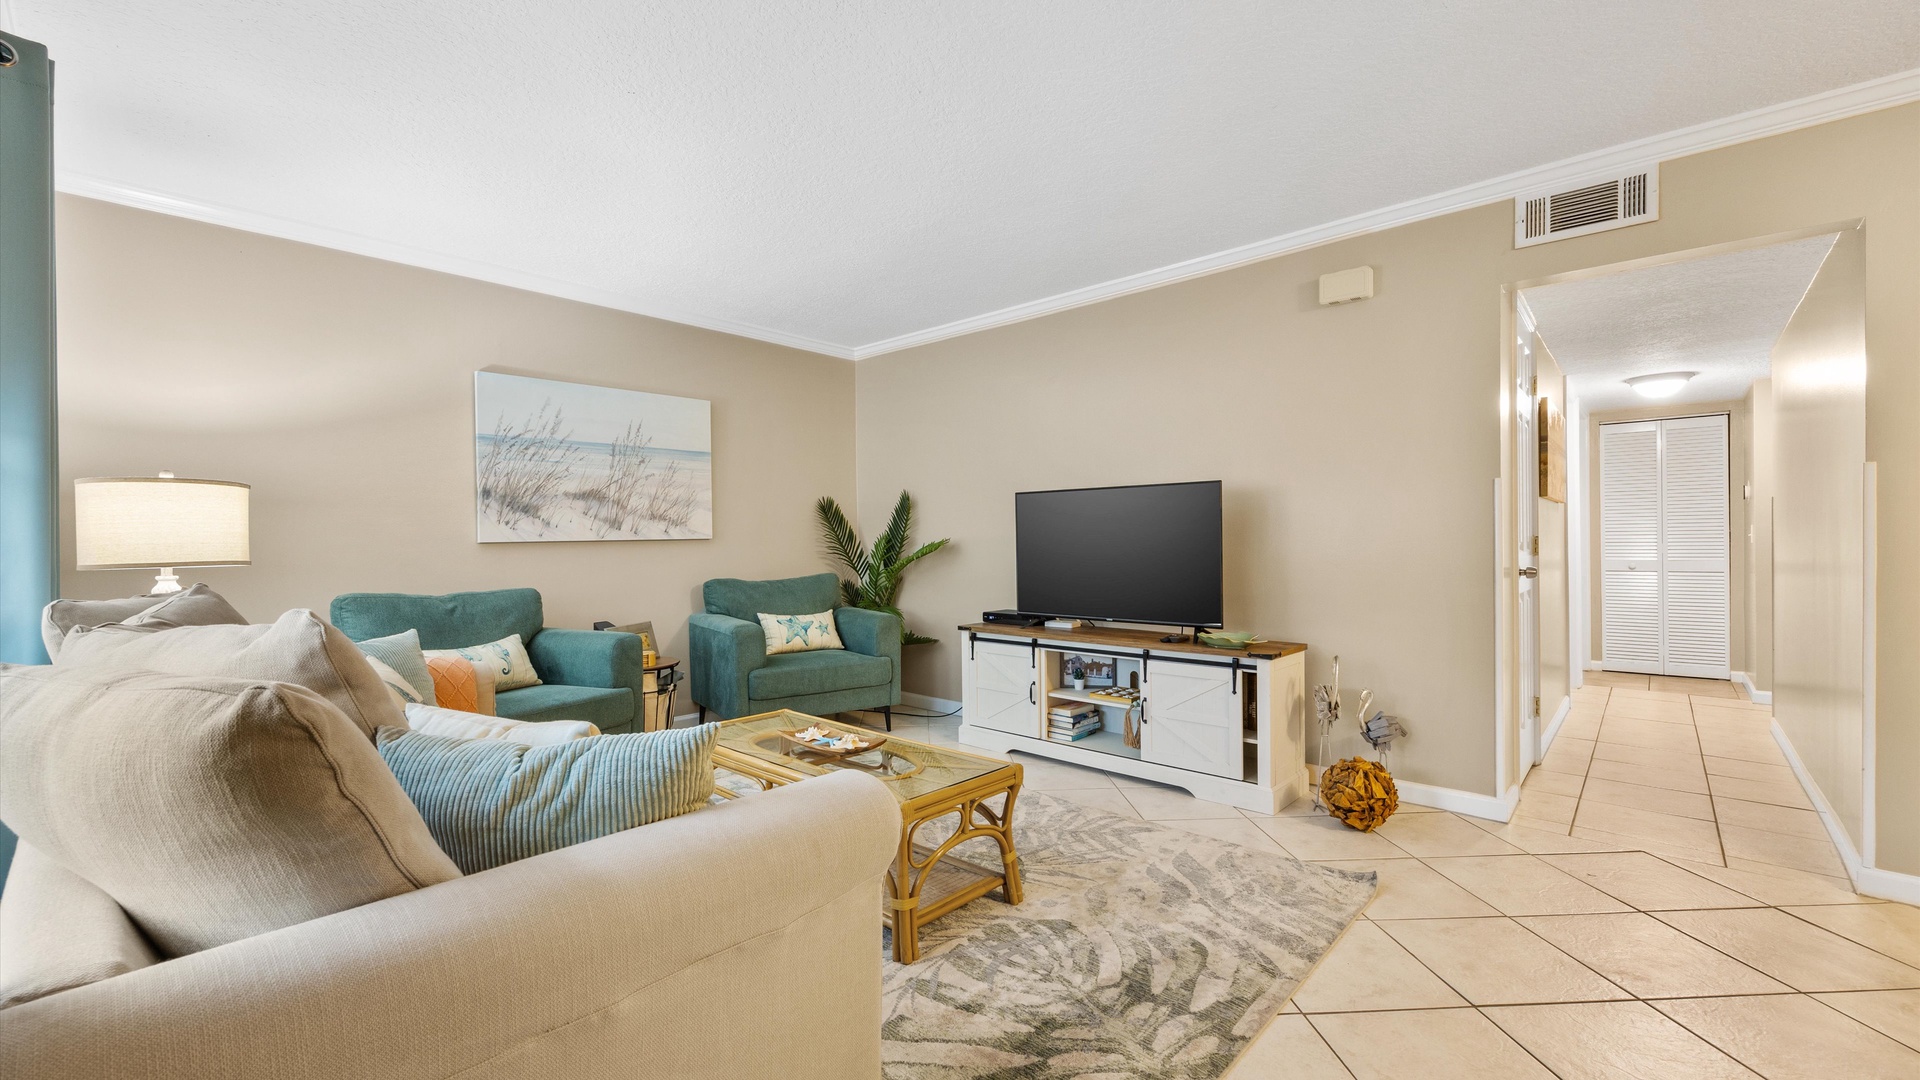 Stream all your favorite entertainment in the comfy coastal living room